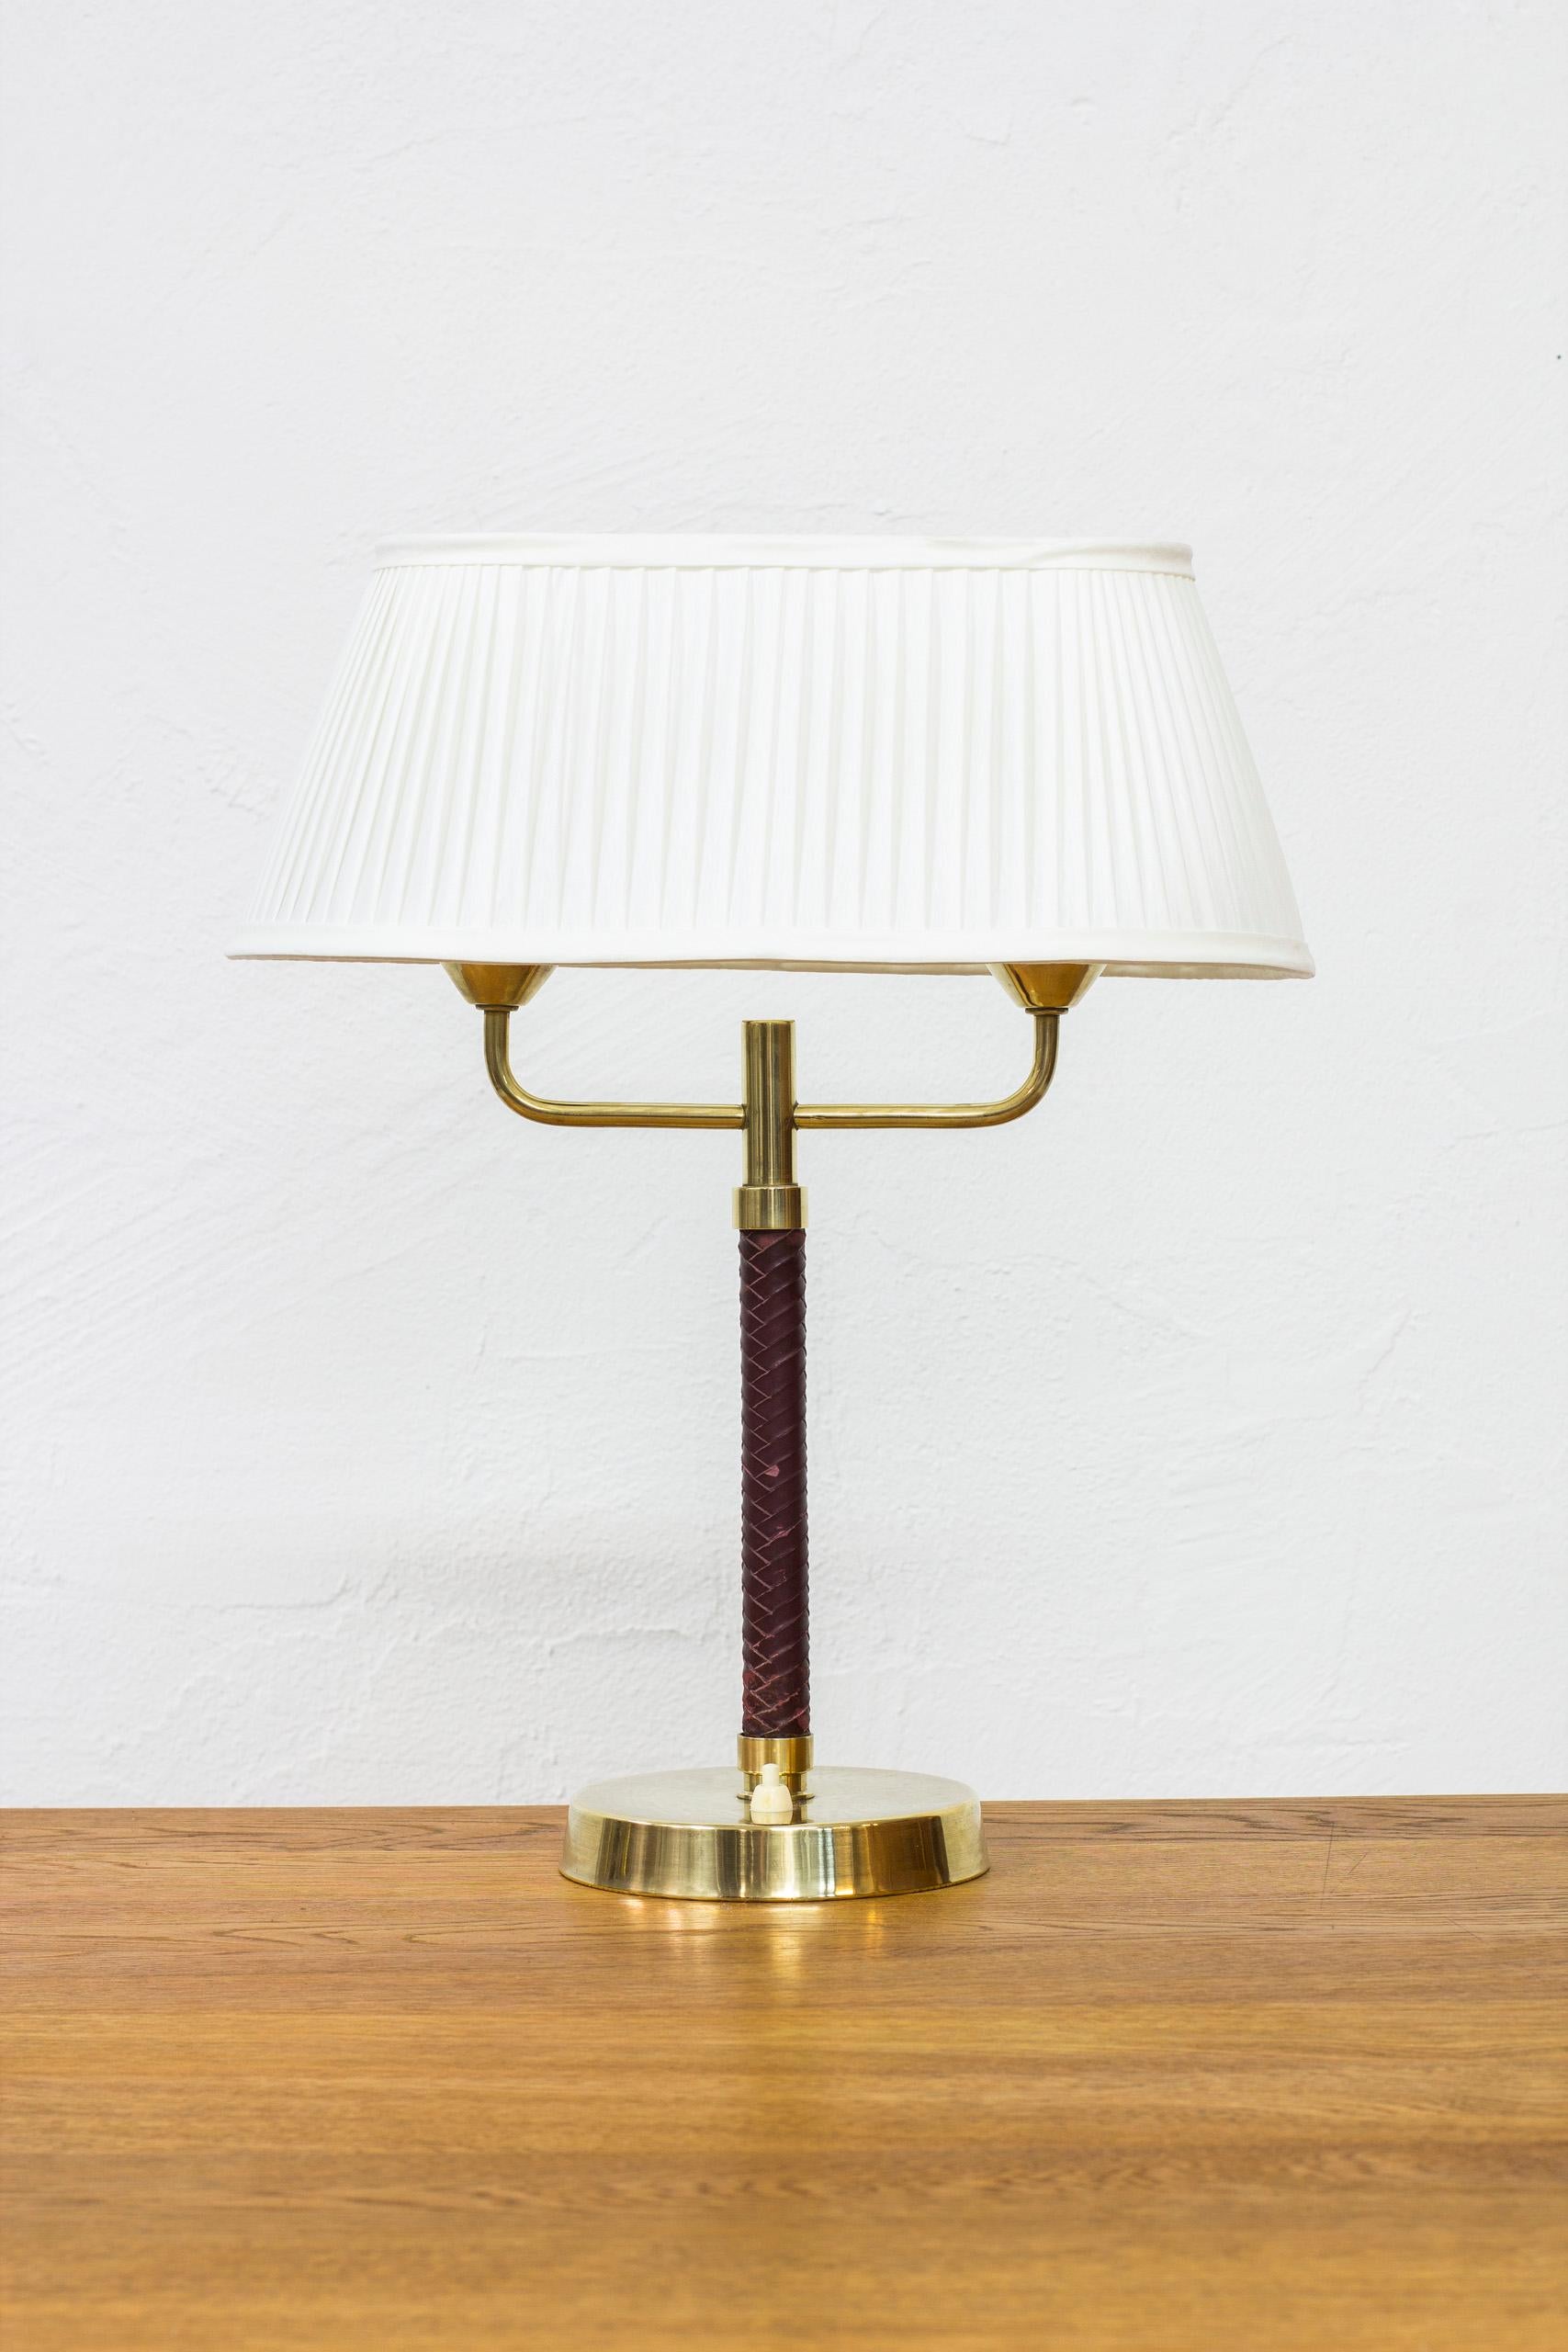 Table lamp produced by Karlskrona lampfabrik in Sweden. Made sometime between the 1940s-1950s. Made from solid brass with original leather on the stem. Original lamp shade with new pleated hand sewn chintz fabric. Light switch on the base in working